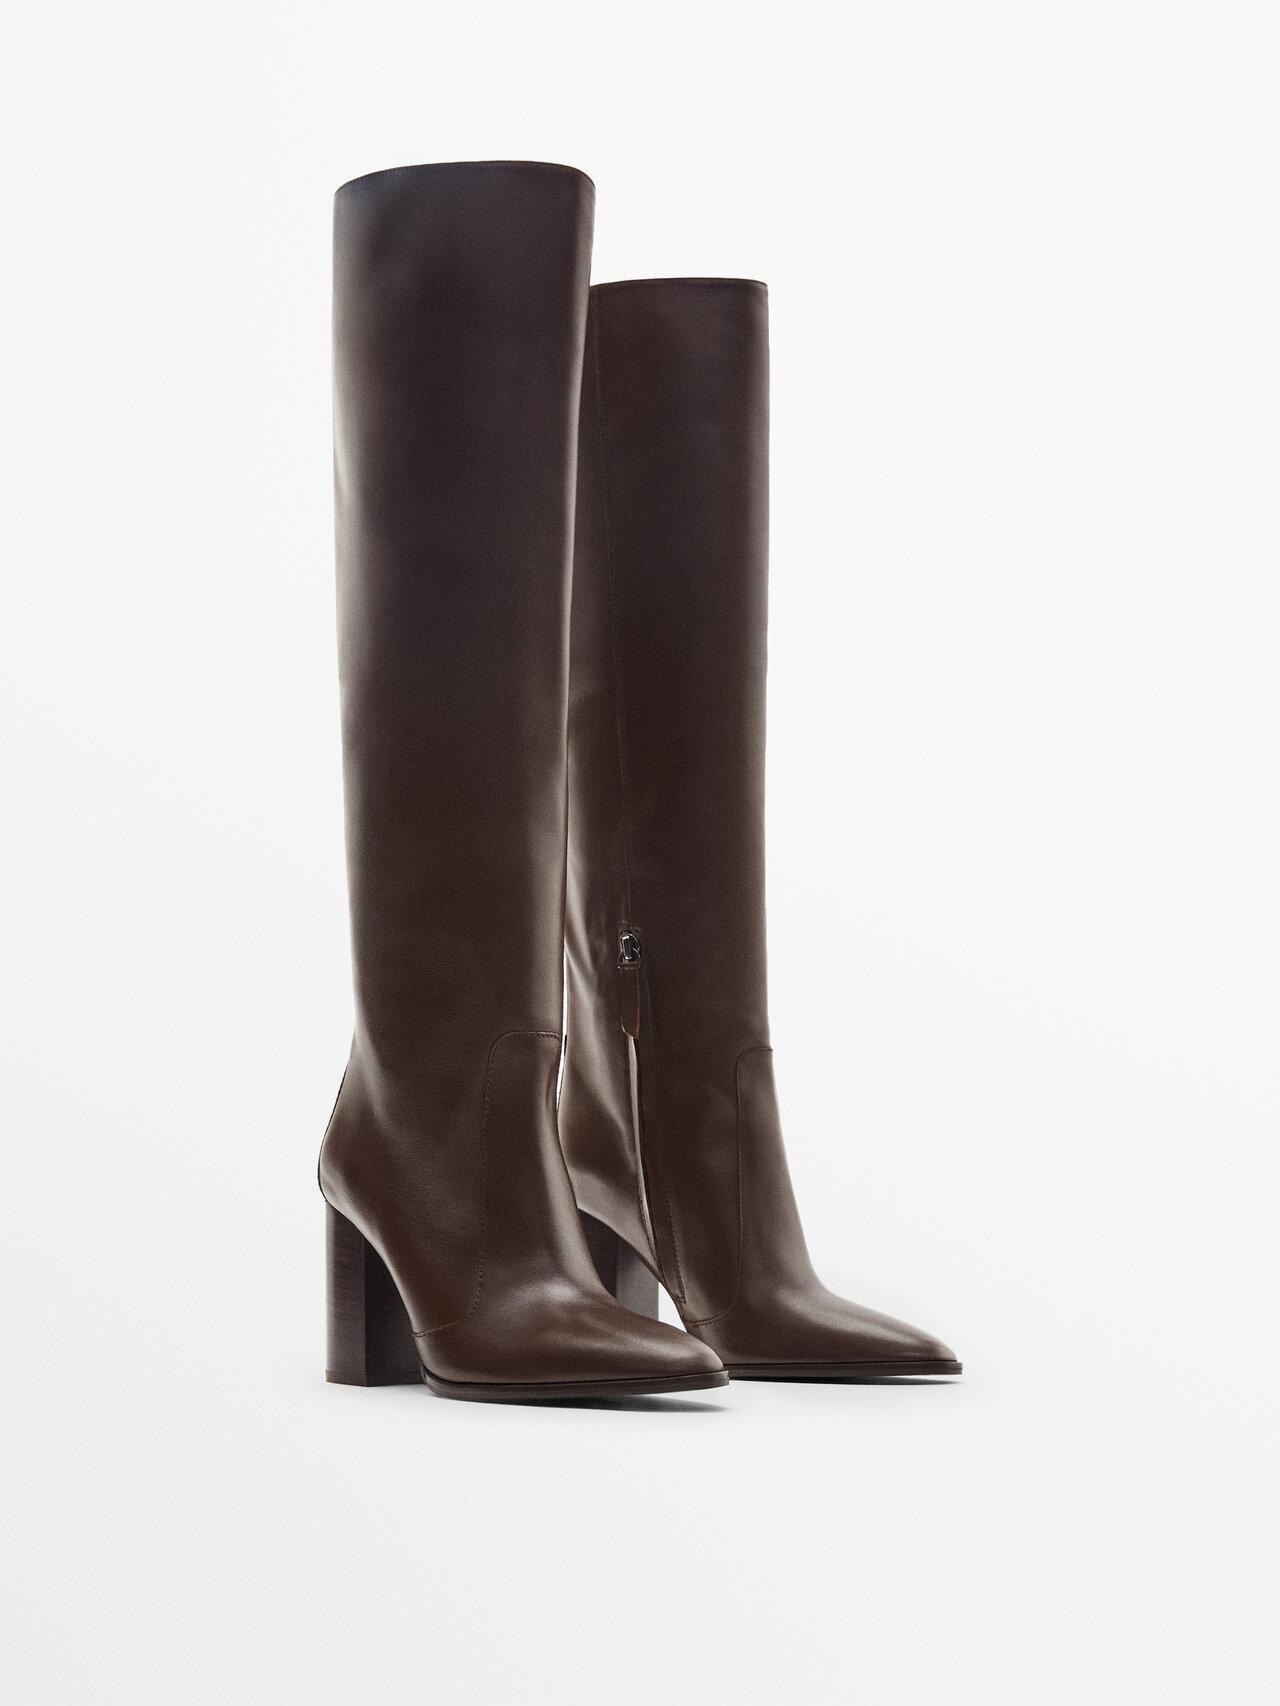 MASSIMO DUTTI Heeled Leather Boots in Brown | Lyst